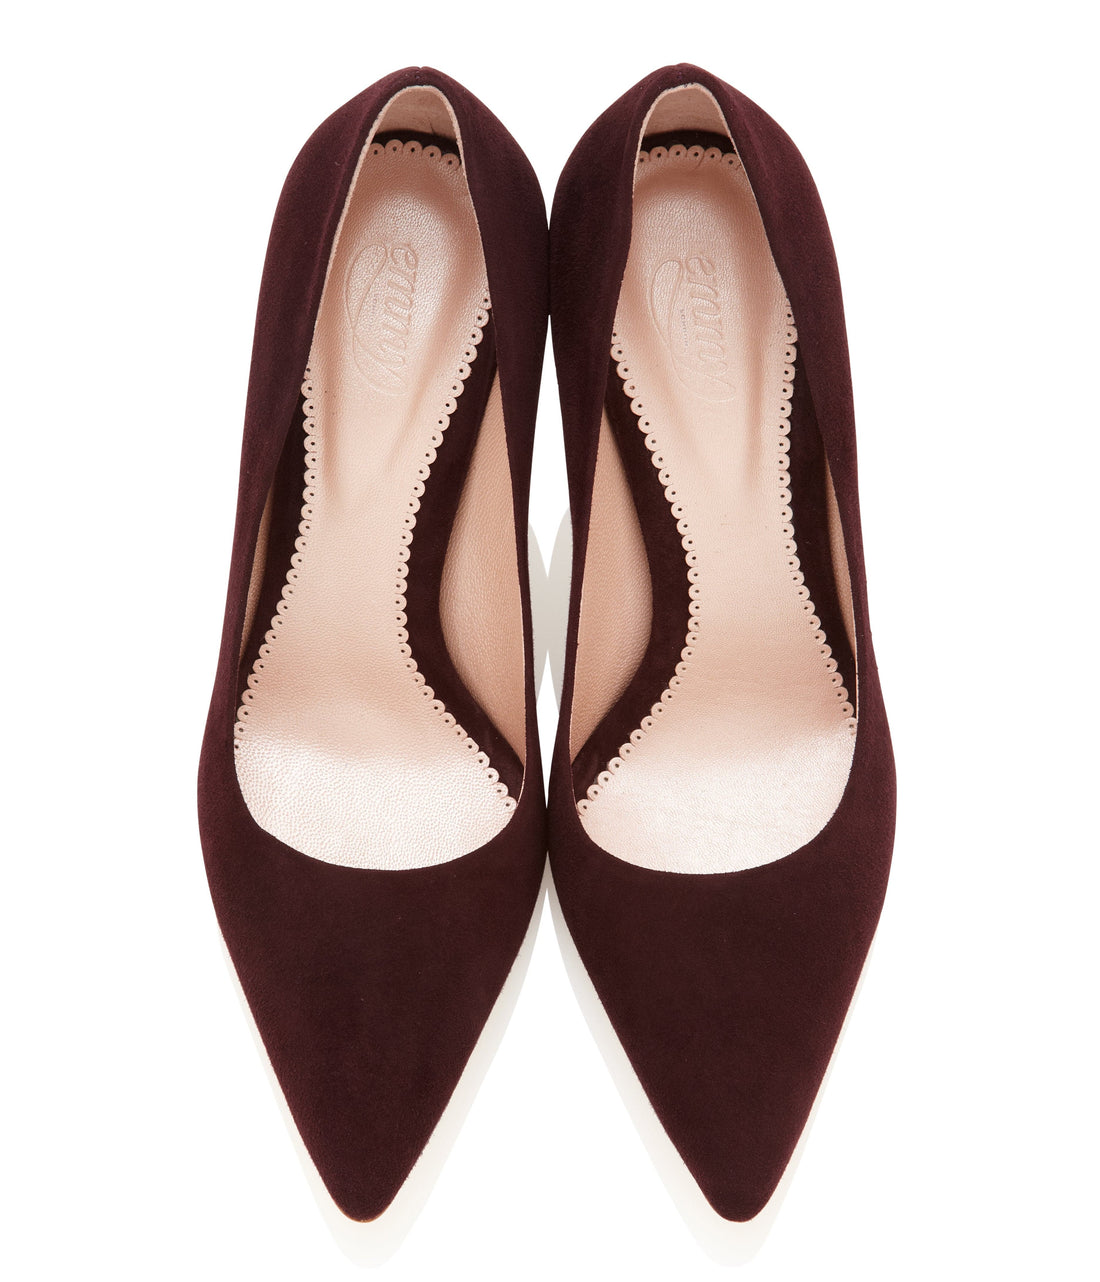 Olivia Claret Fashion Shoe Red Pointed Suede Court Shoes